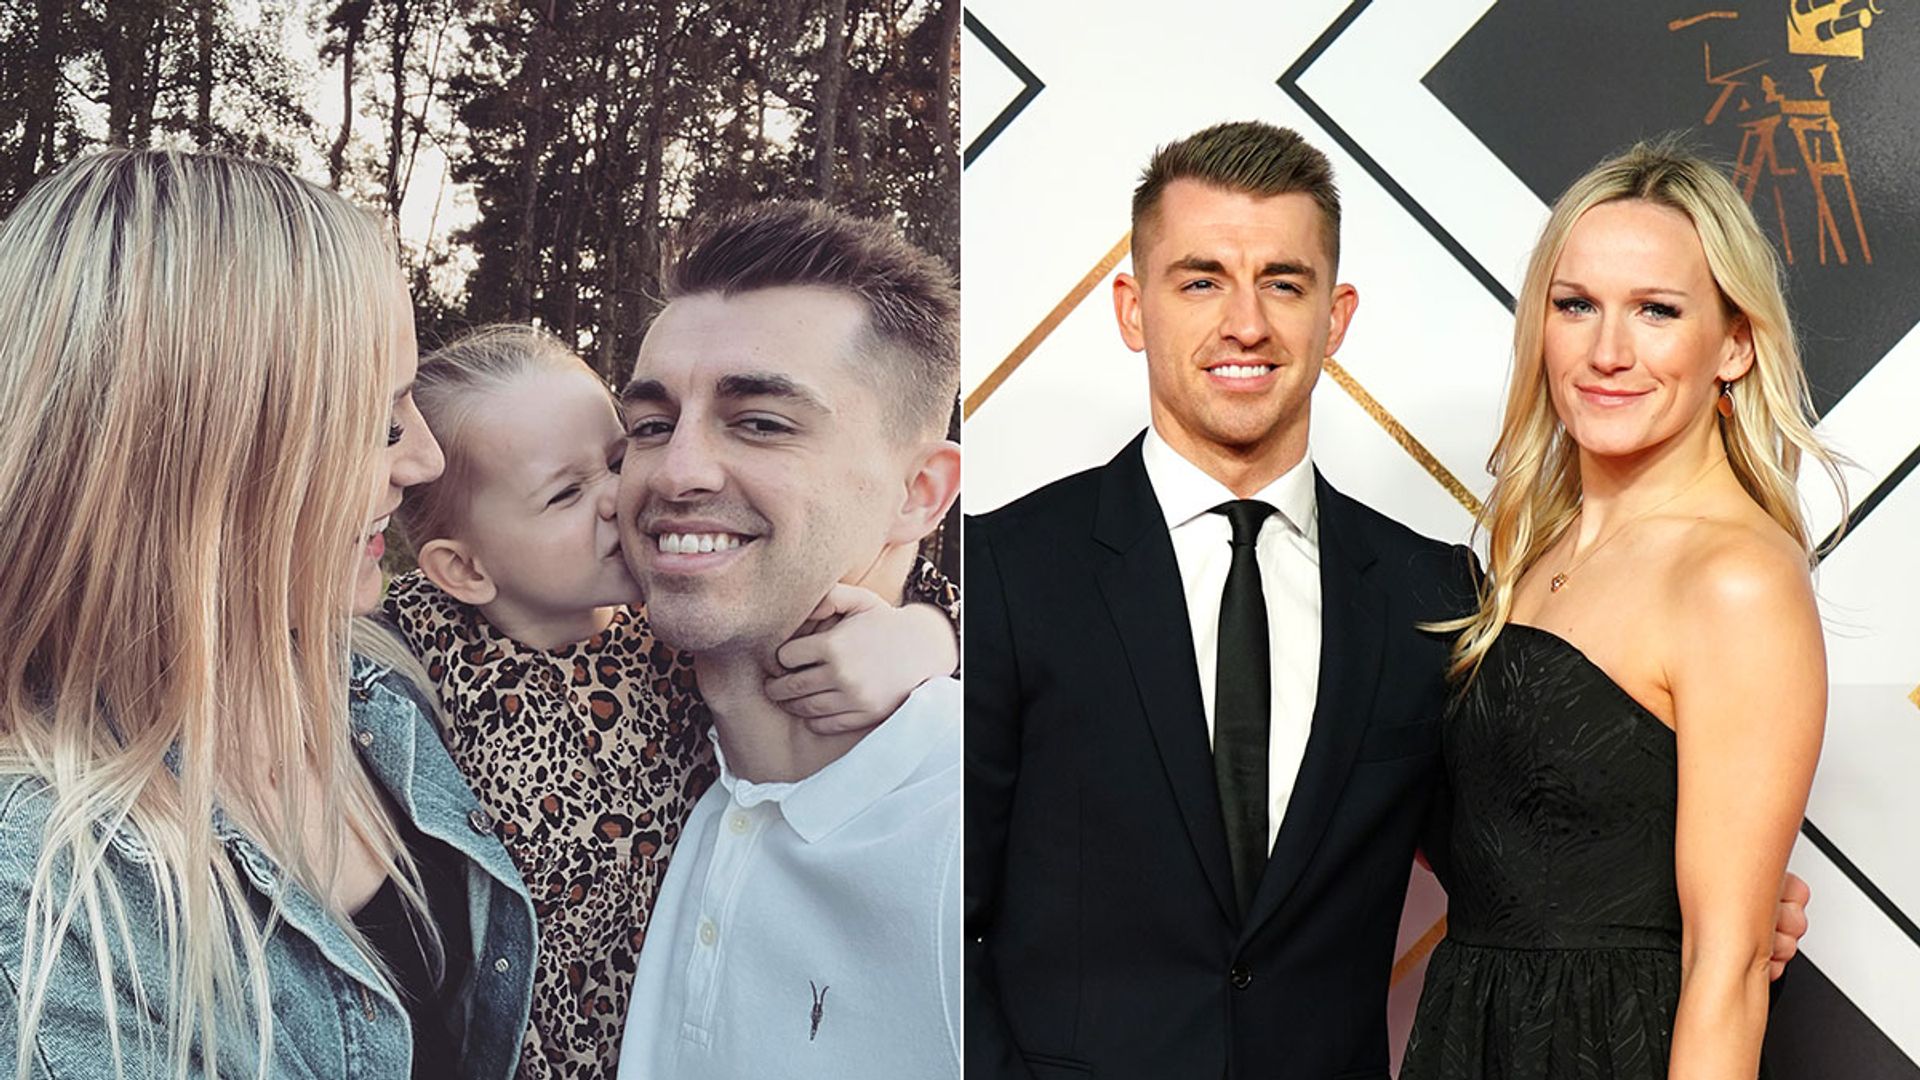 Max Whitlock's ultra-private life: His adorable daughter and childhood sweetheart wife Leah